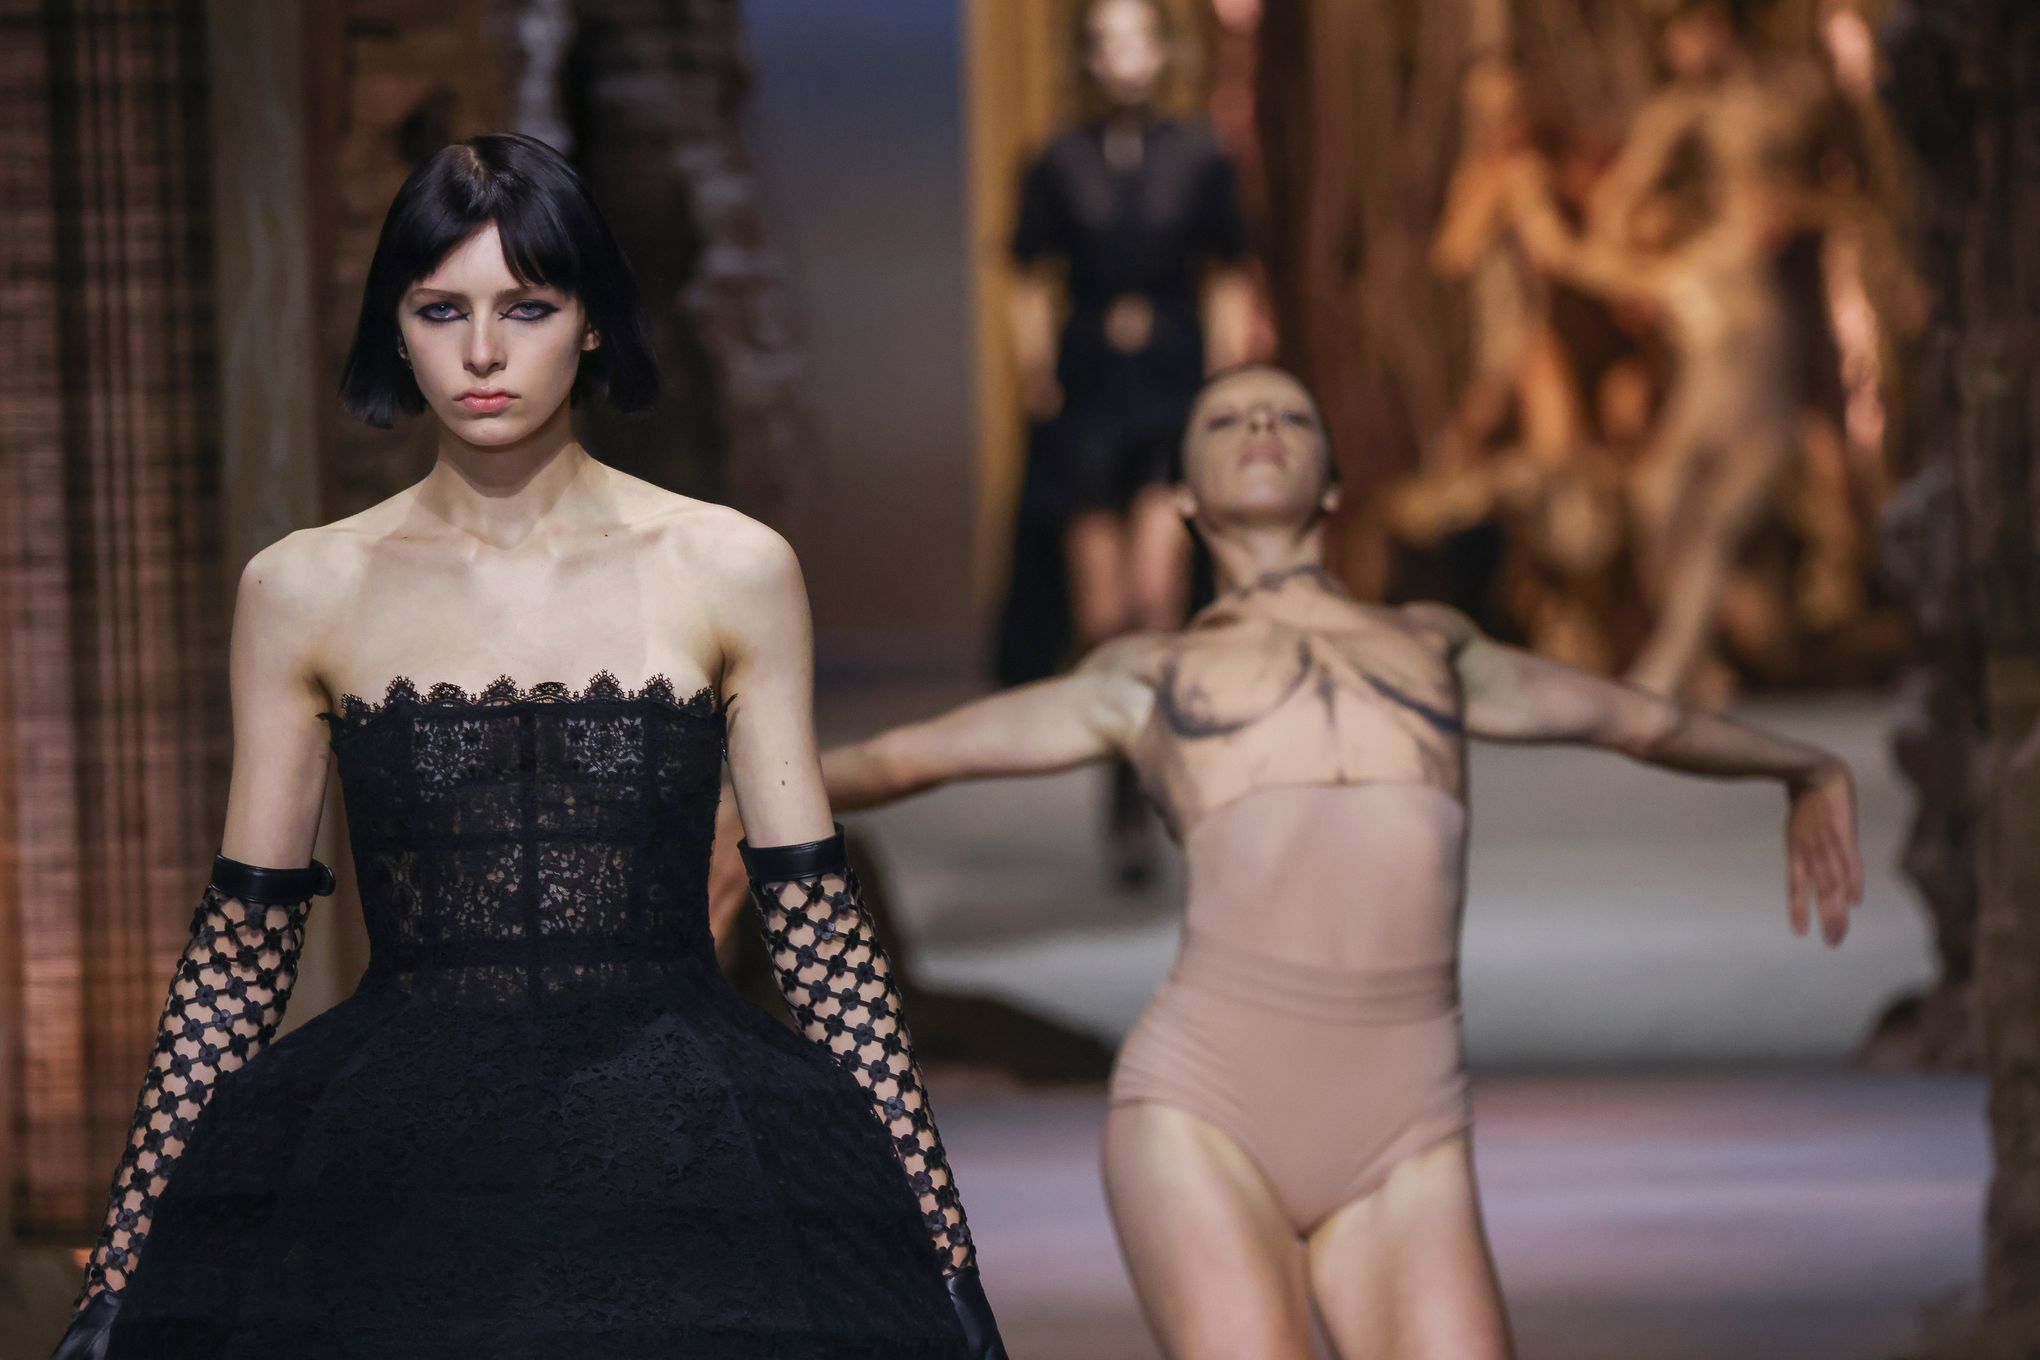 Paris Fashion Week: 16th century inspires Dior's new collection